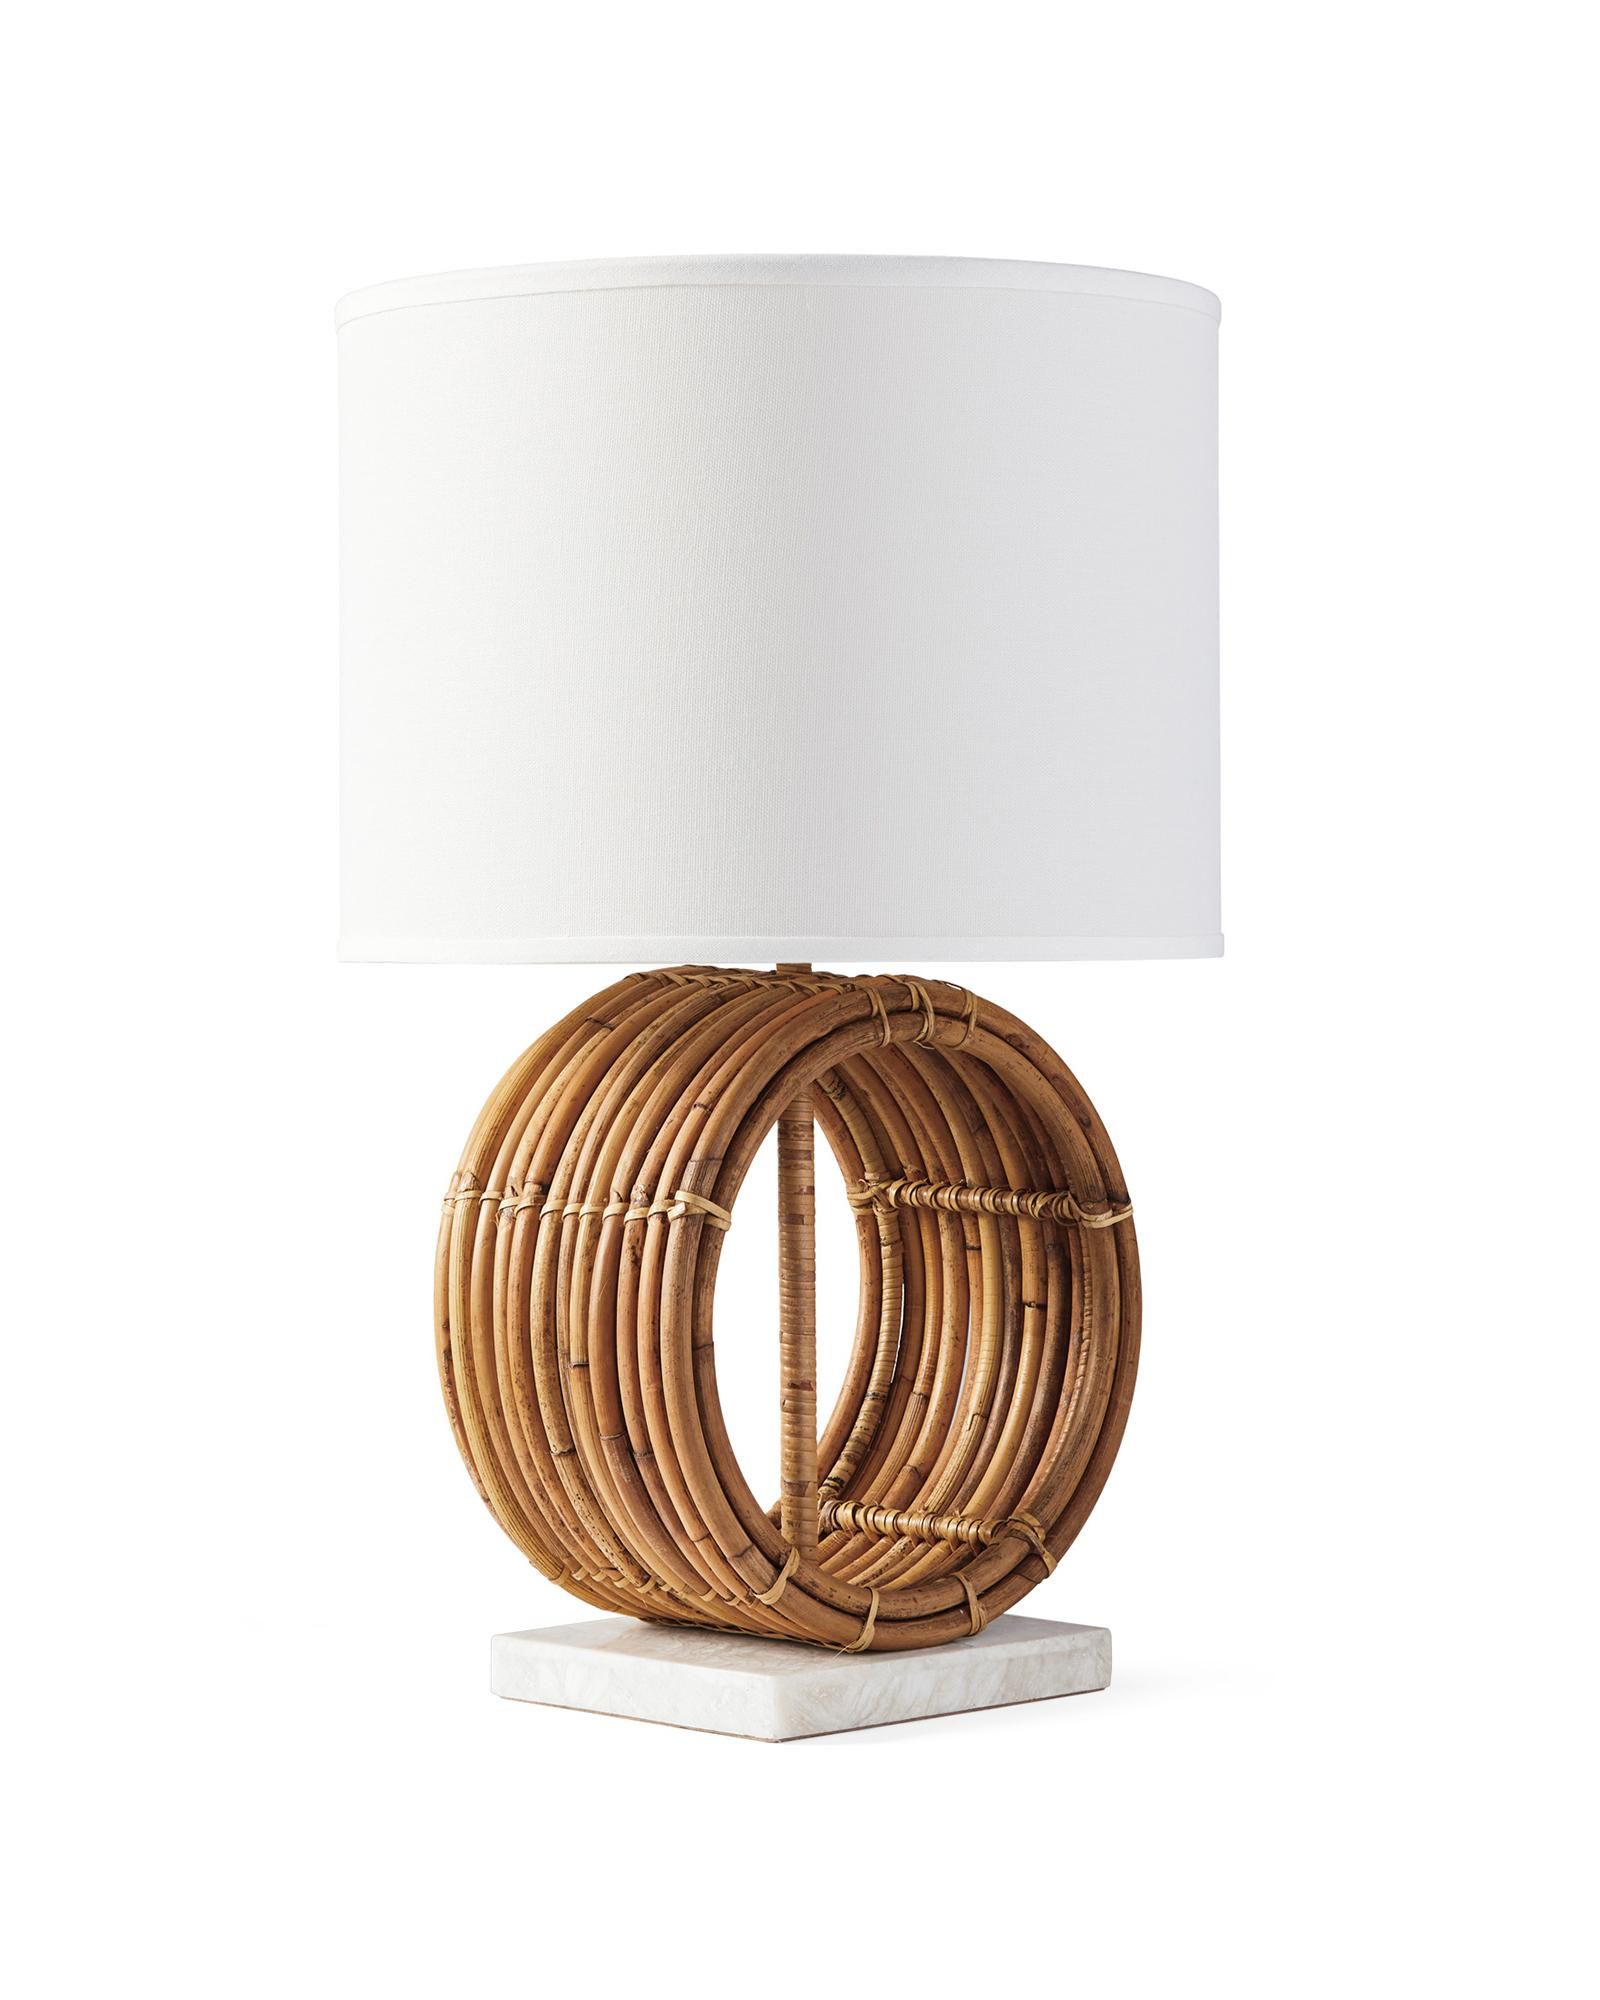 Freeport Rattan Bedside Lamp | Serena and Lily